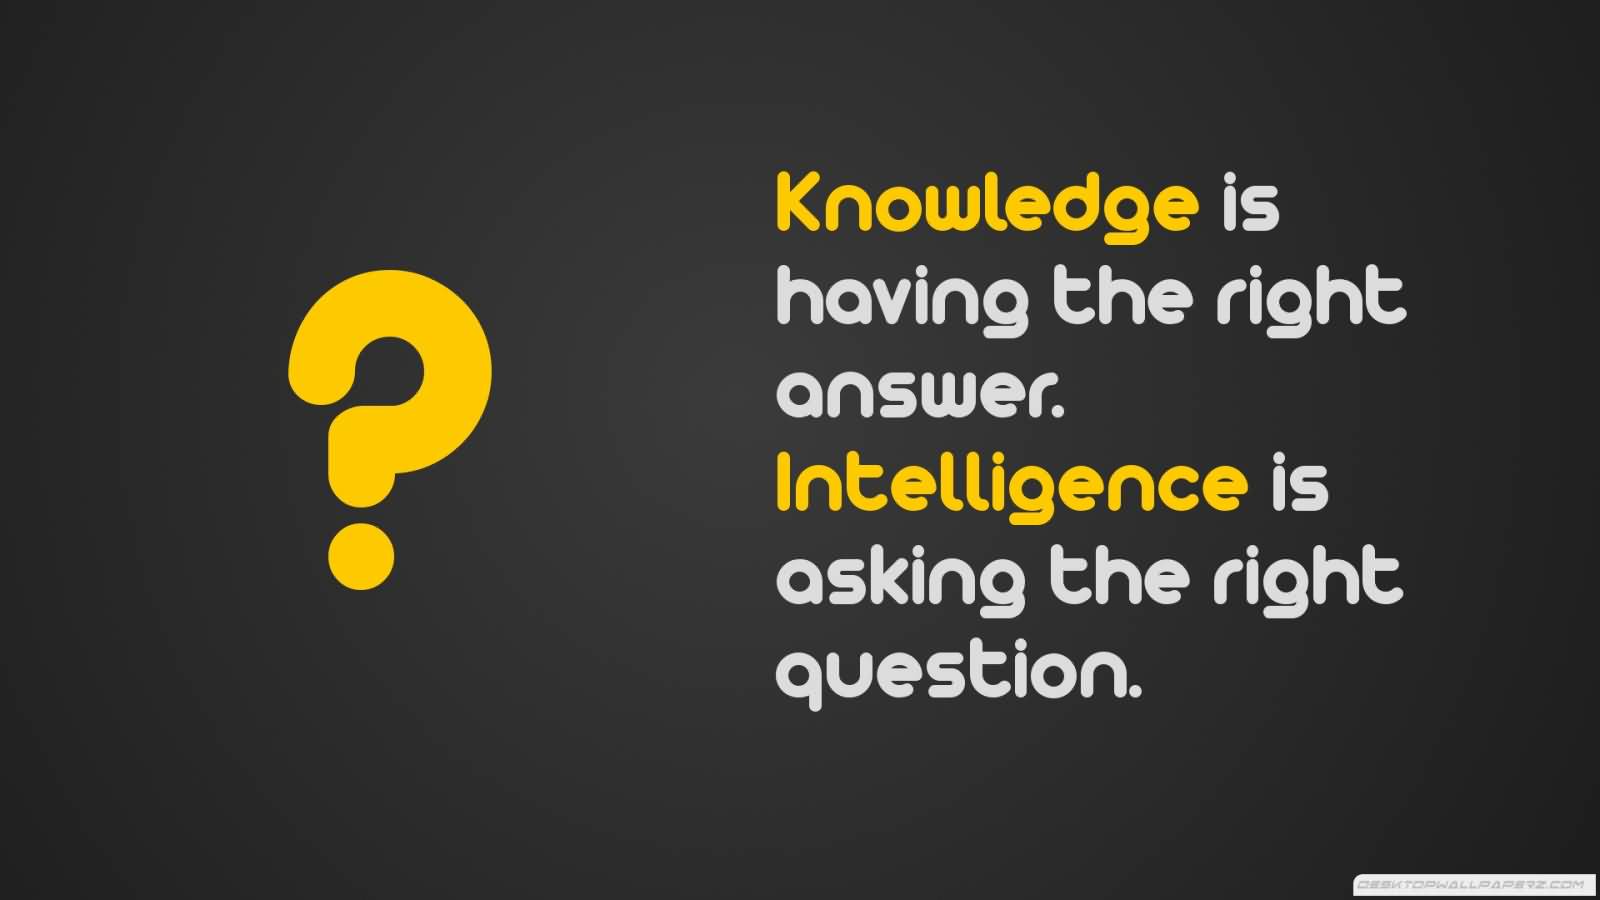 Knowledge is having the right answer. intelligence is asking the right question